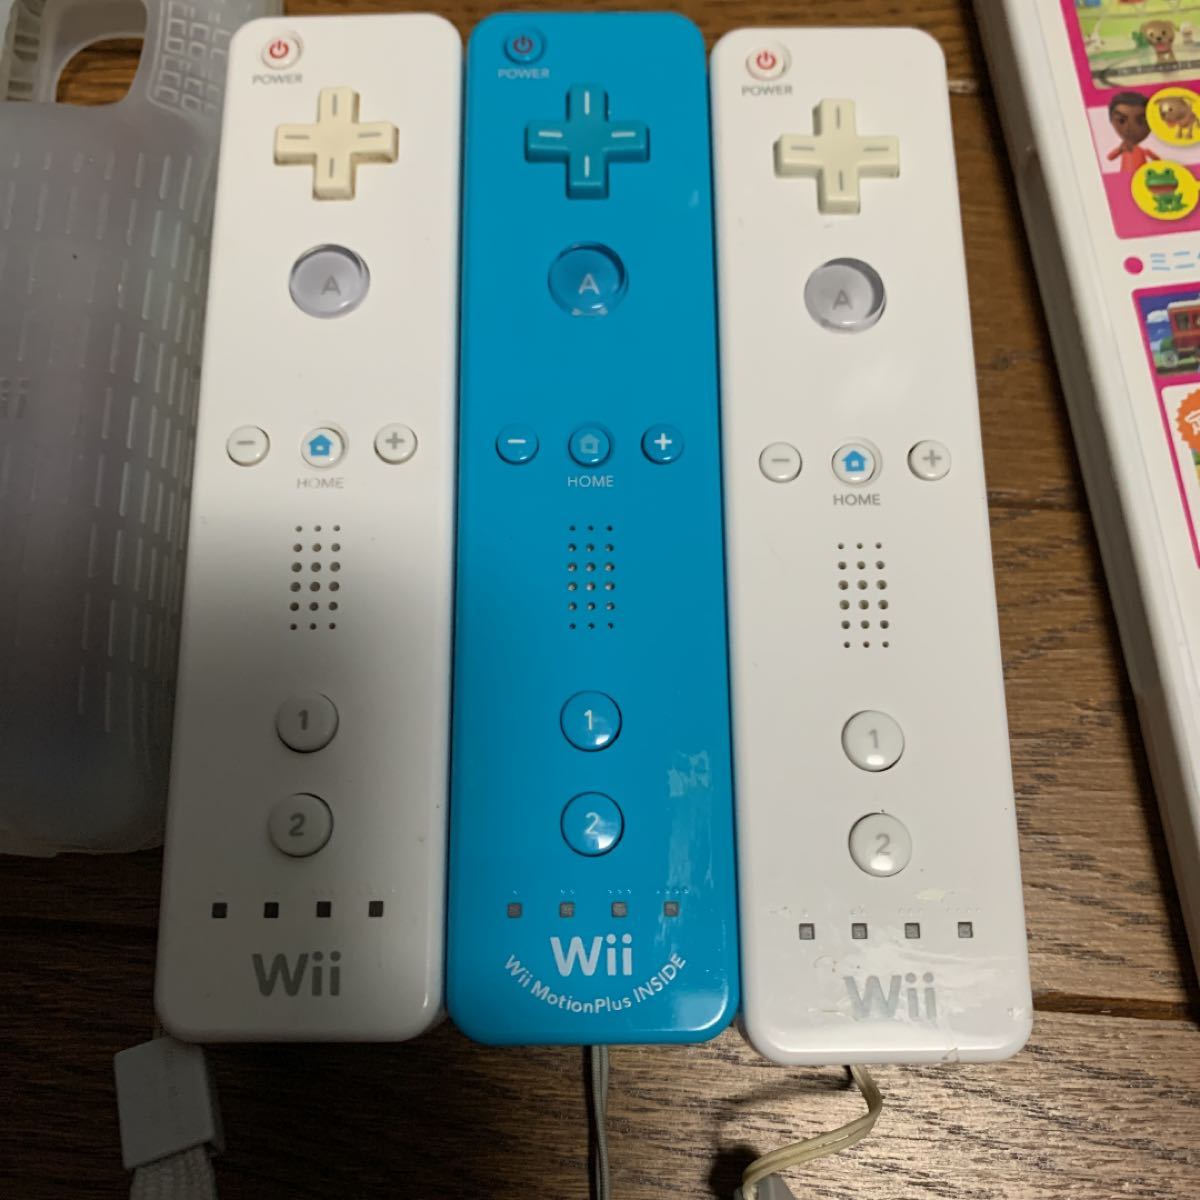 WIIリモコン3本とWIIパーティ